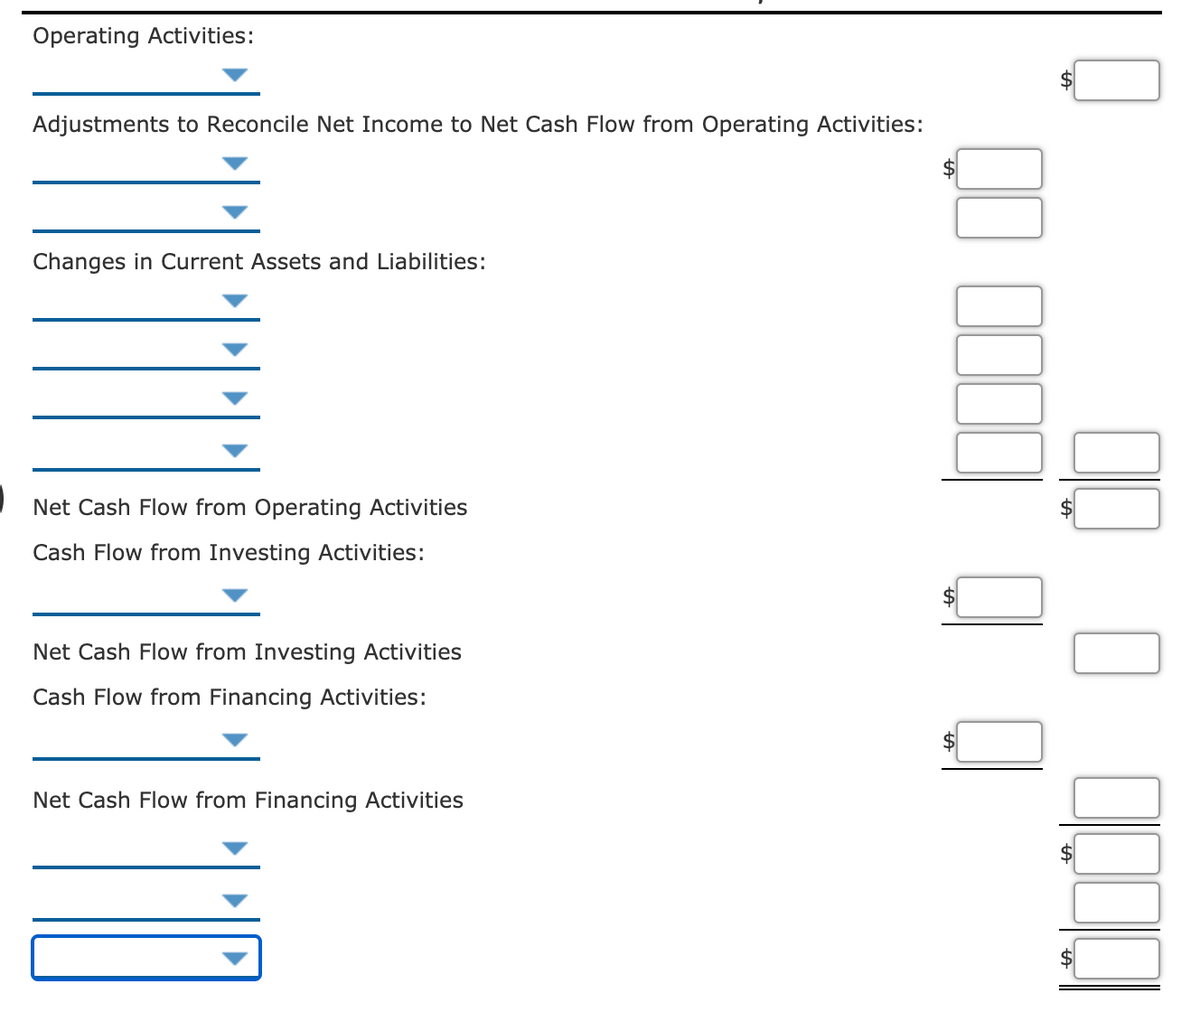 Operating Activities:
Adjustments to Reconcile Net Income to Net Cash Flow from Operating Activities:
Changes in Current Assets and Liabilities:
Net Cash Flow from Operating Activities
Cash Flow from Investing Activities:
Net Cash Flow from Investing Activities
Cash Flow from Financing Activities:
Net Cash Flow from Financing Activities
